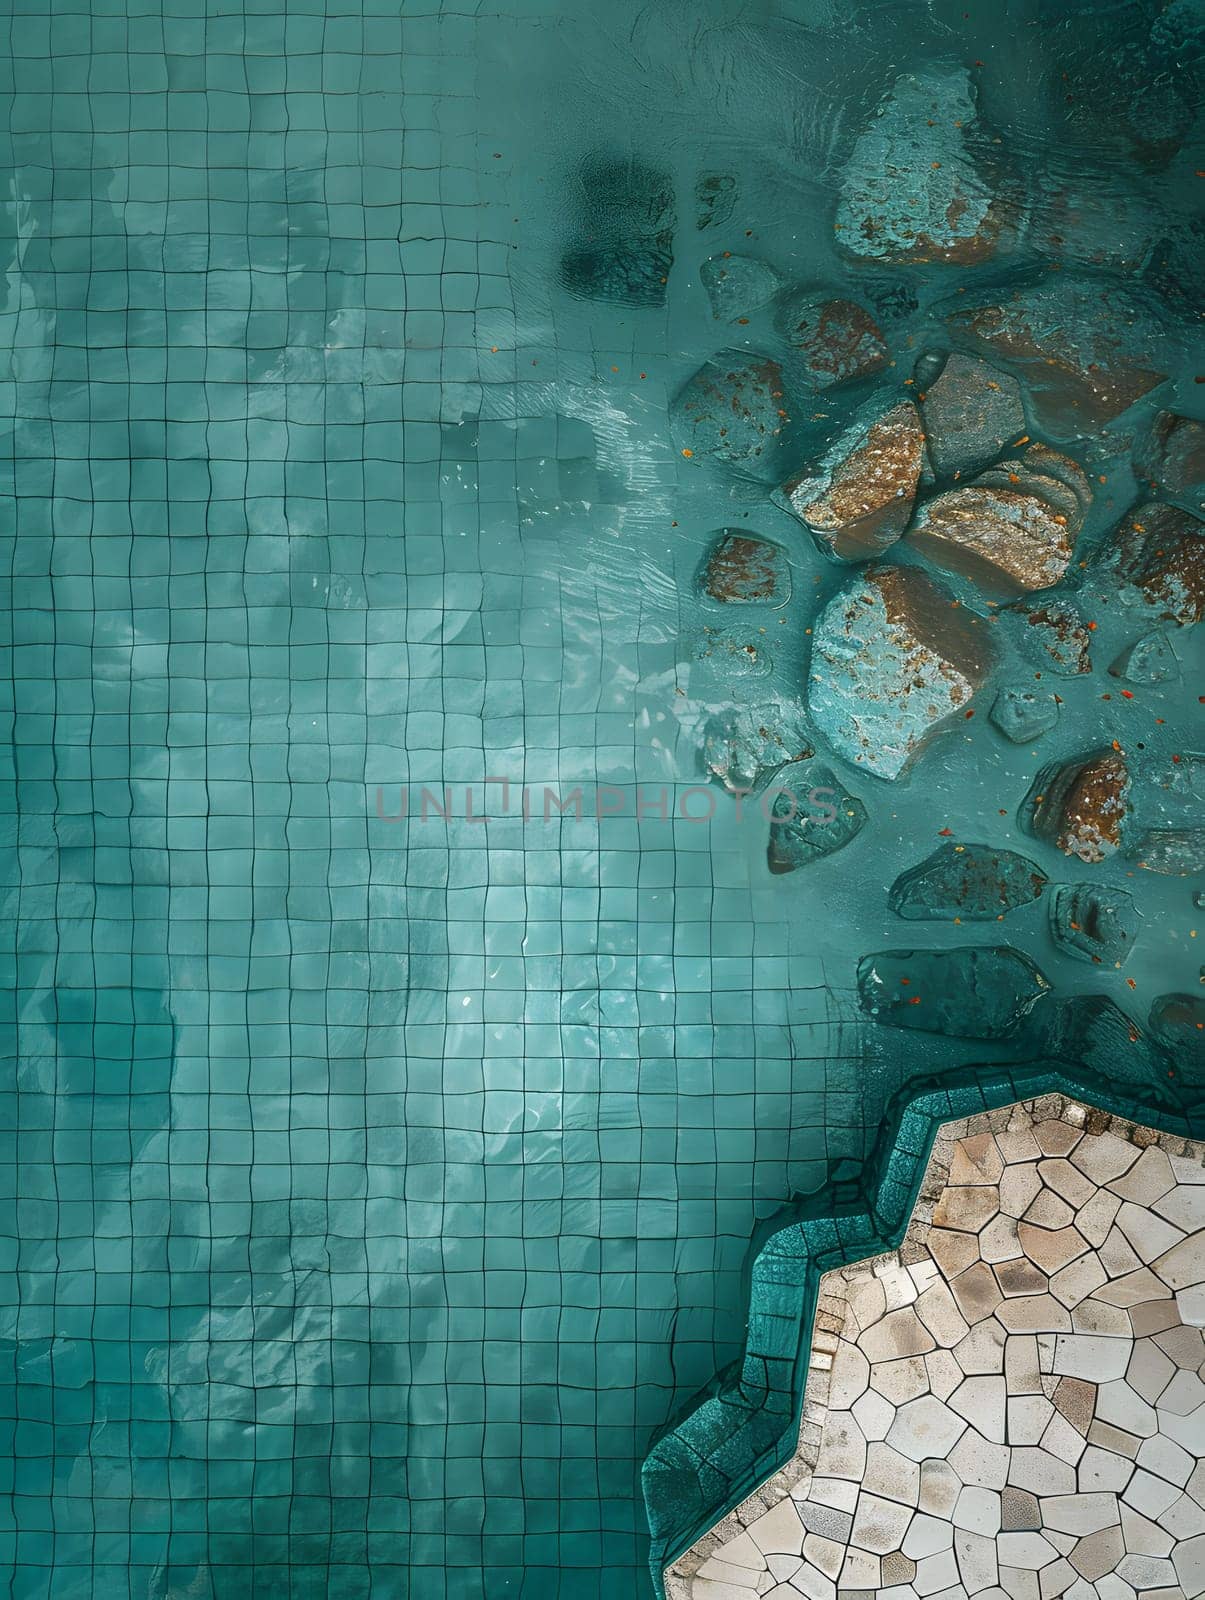 Aqua flooring resembling a pool with rocks creates an electric blue pattern by Nadtochiy